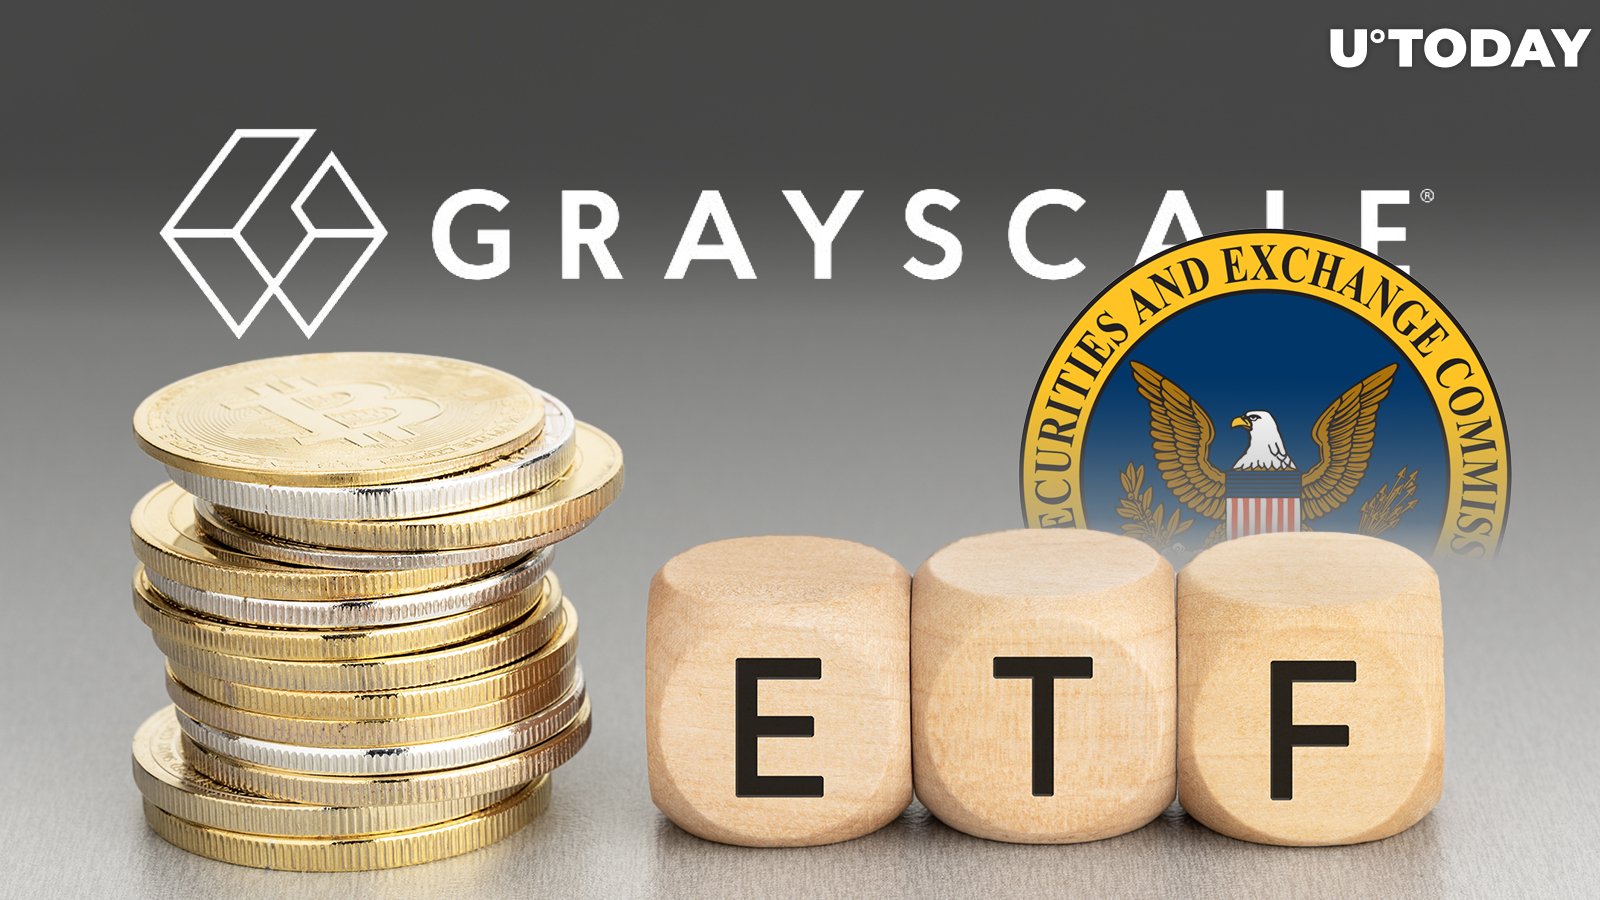 Grayscale Bitcoin ETF Saga: No Ruling in SEC Lawsuit Today